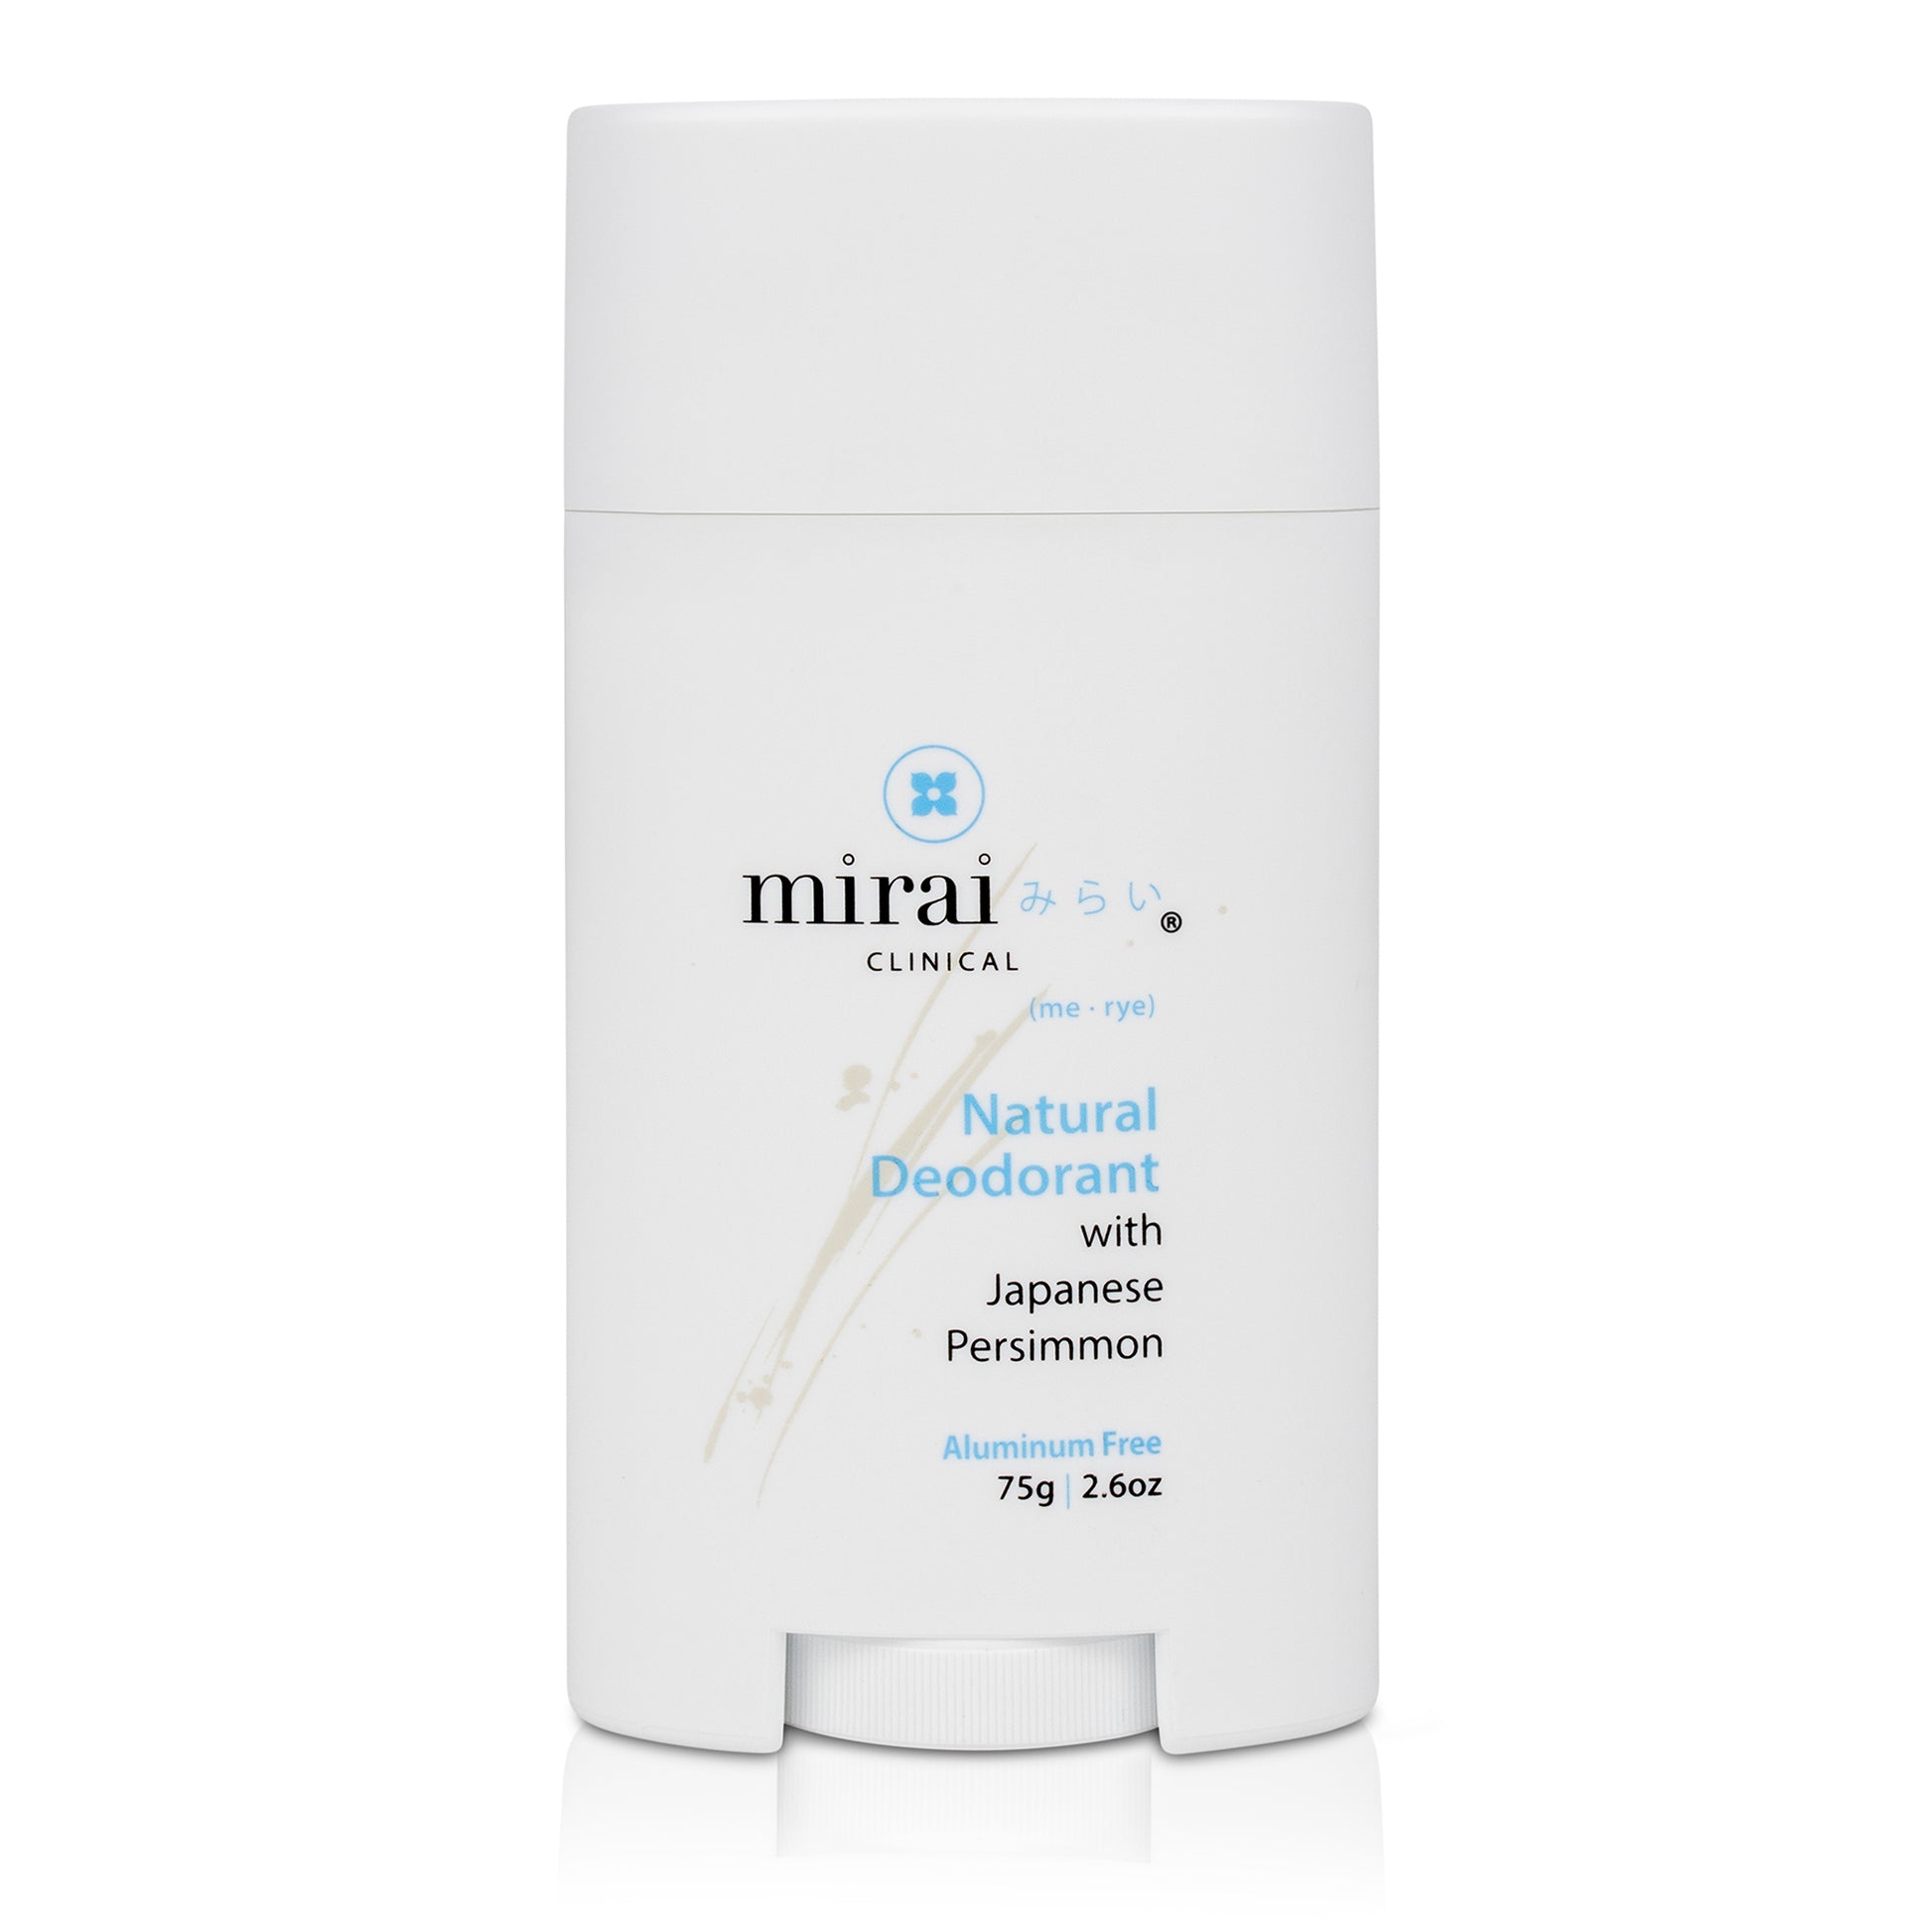 Mirai Clinical Natural Deodorant with Japanese Persimmon - Front